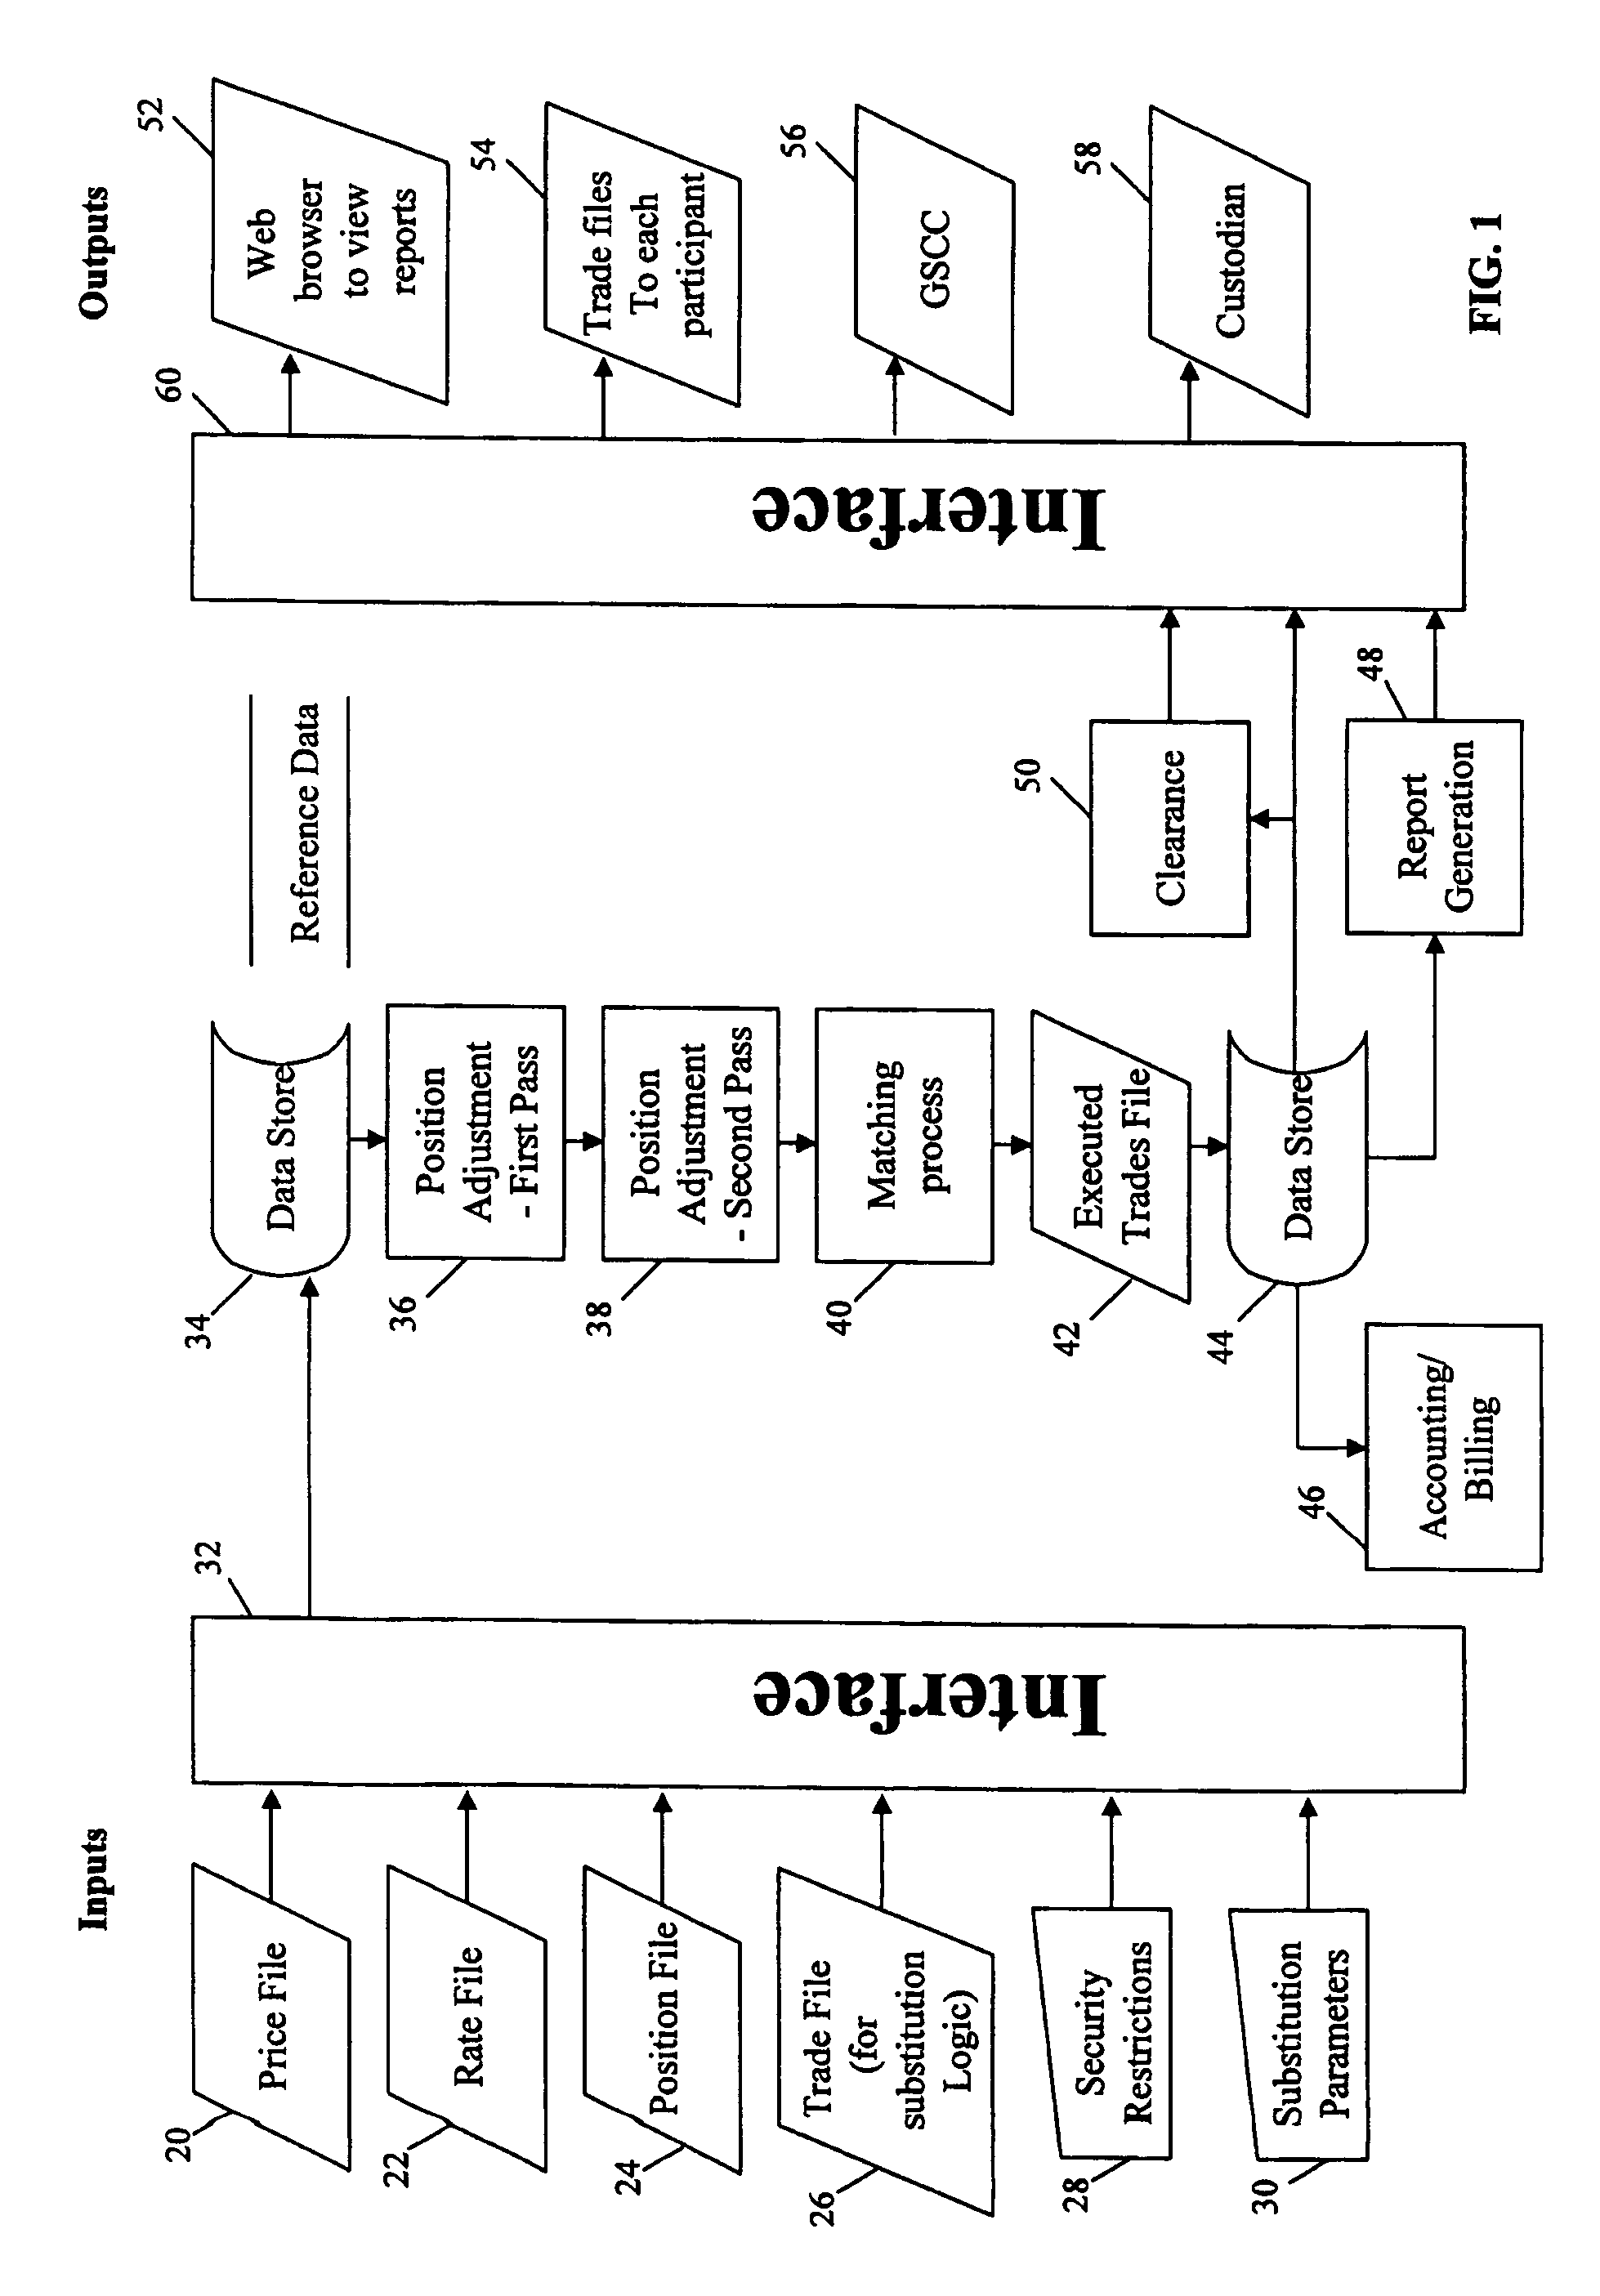 Method and system for efficiently matching long and short positions in securities trading and transacting a series of overnight trades for balance sheet netting